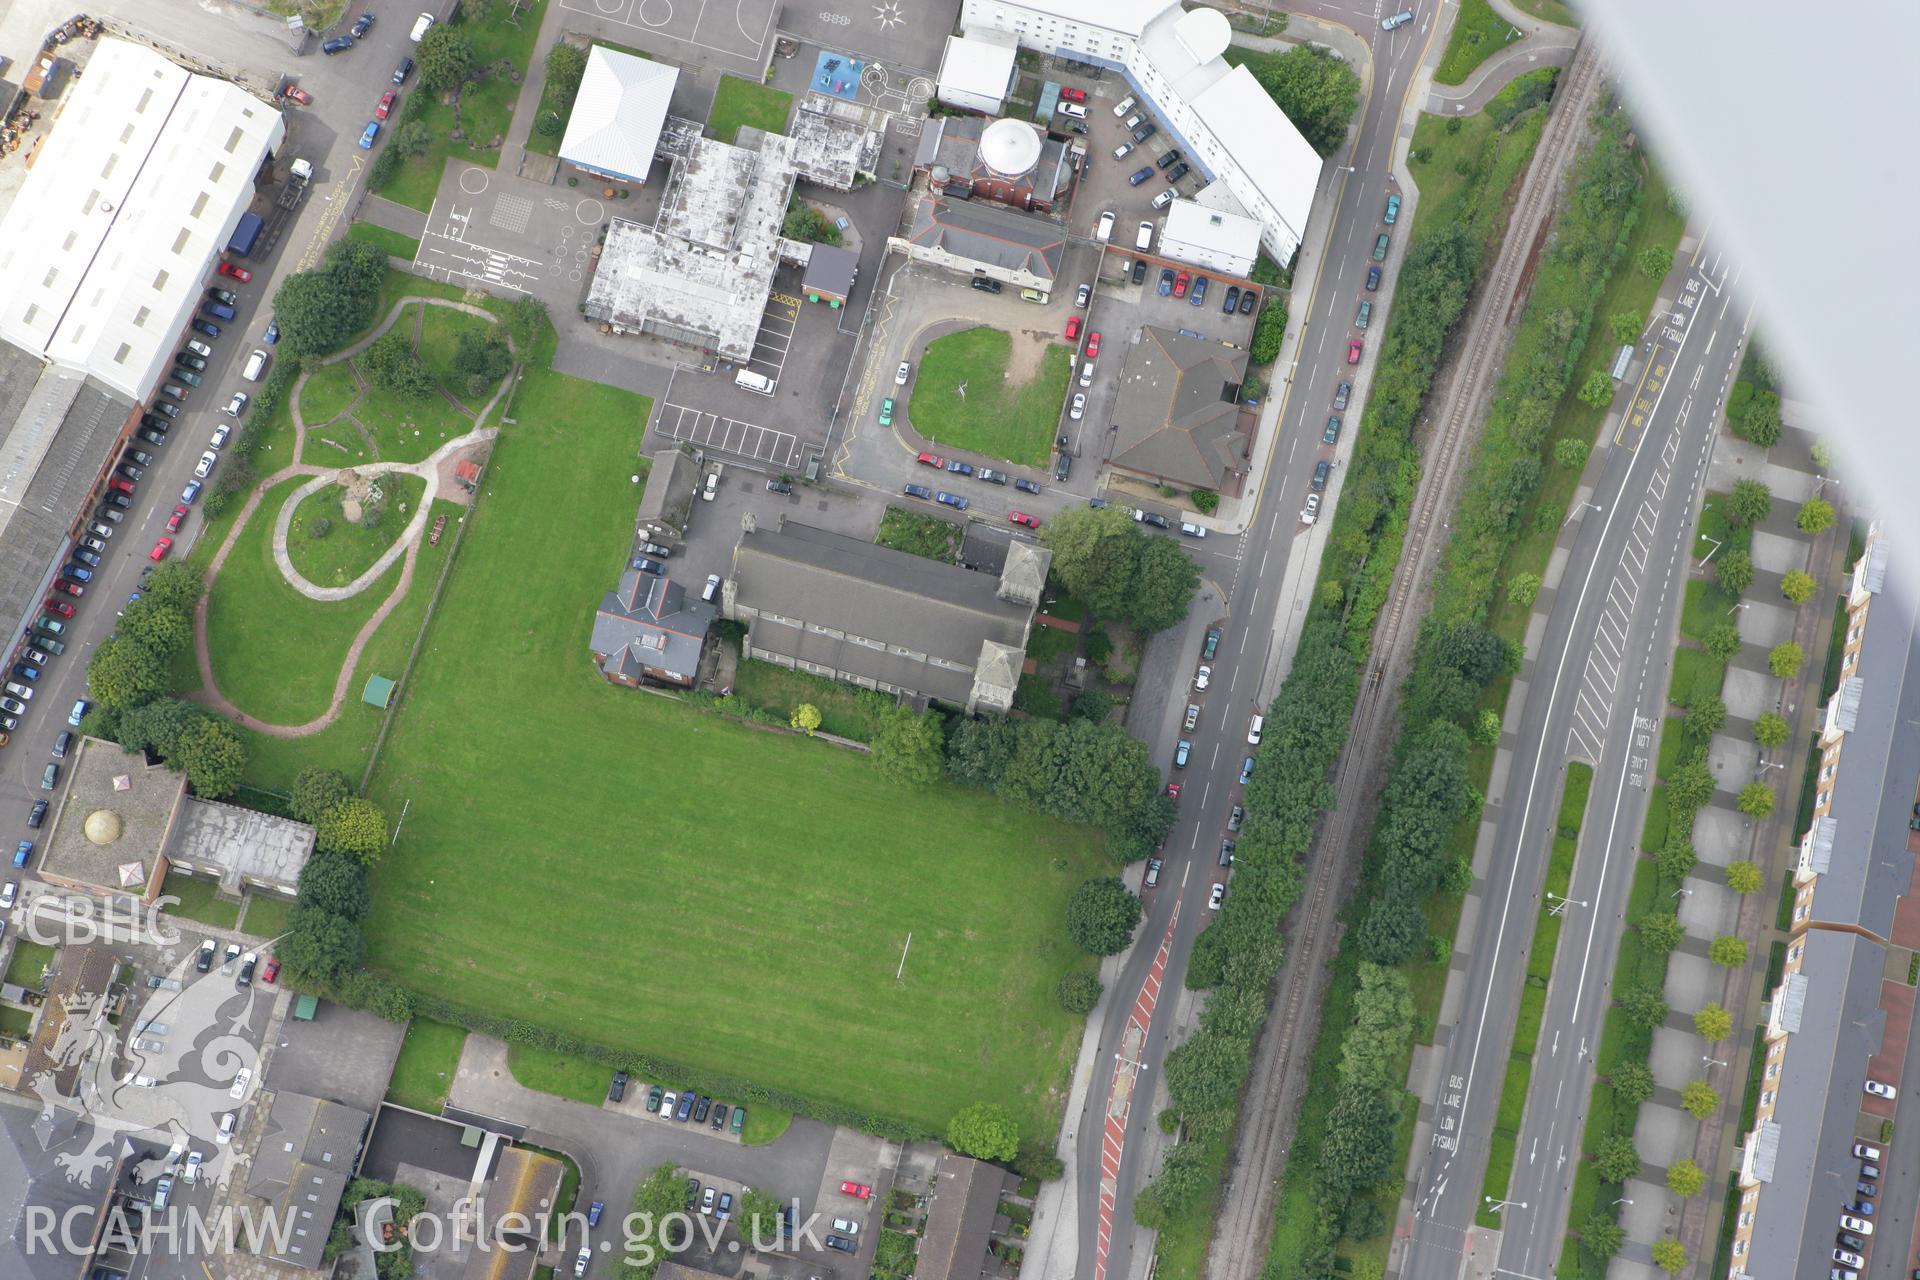 RCAHMW colour oblique aerial photograph of St Mary the Virgin and St Stephen the Martyr Church, Bute Street. Taken on 30 July 2007 by Toby Driver